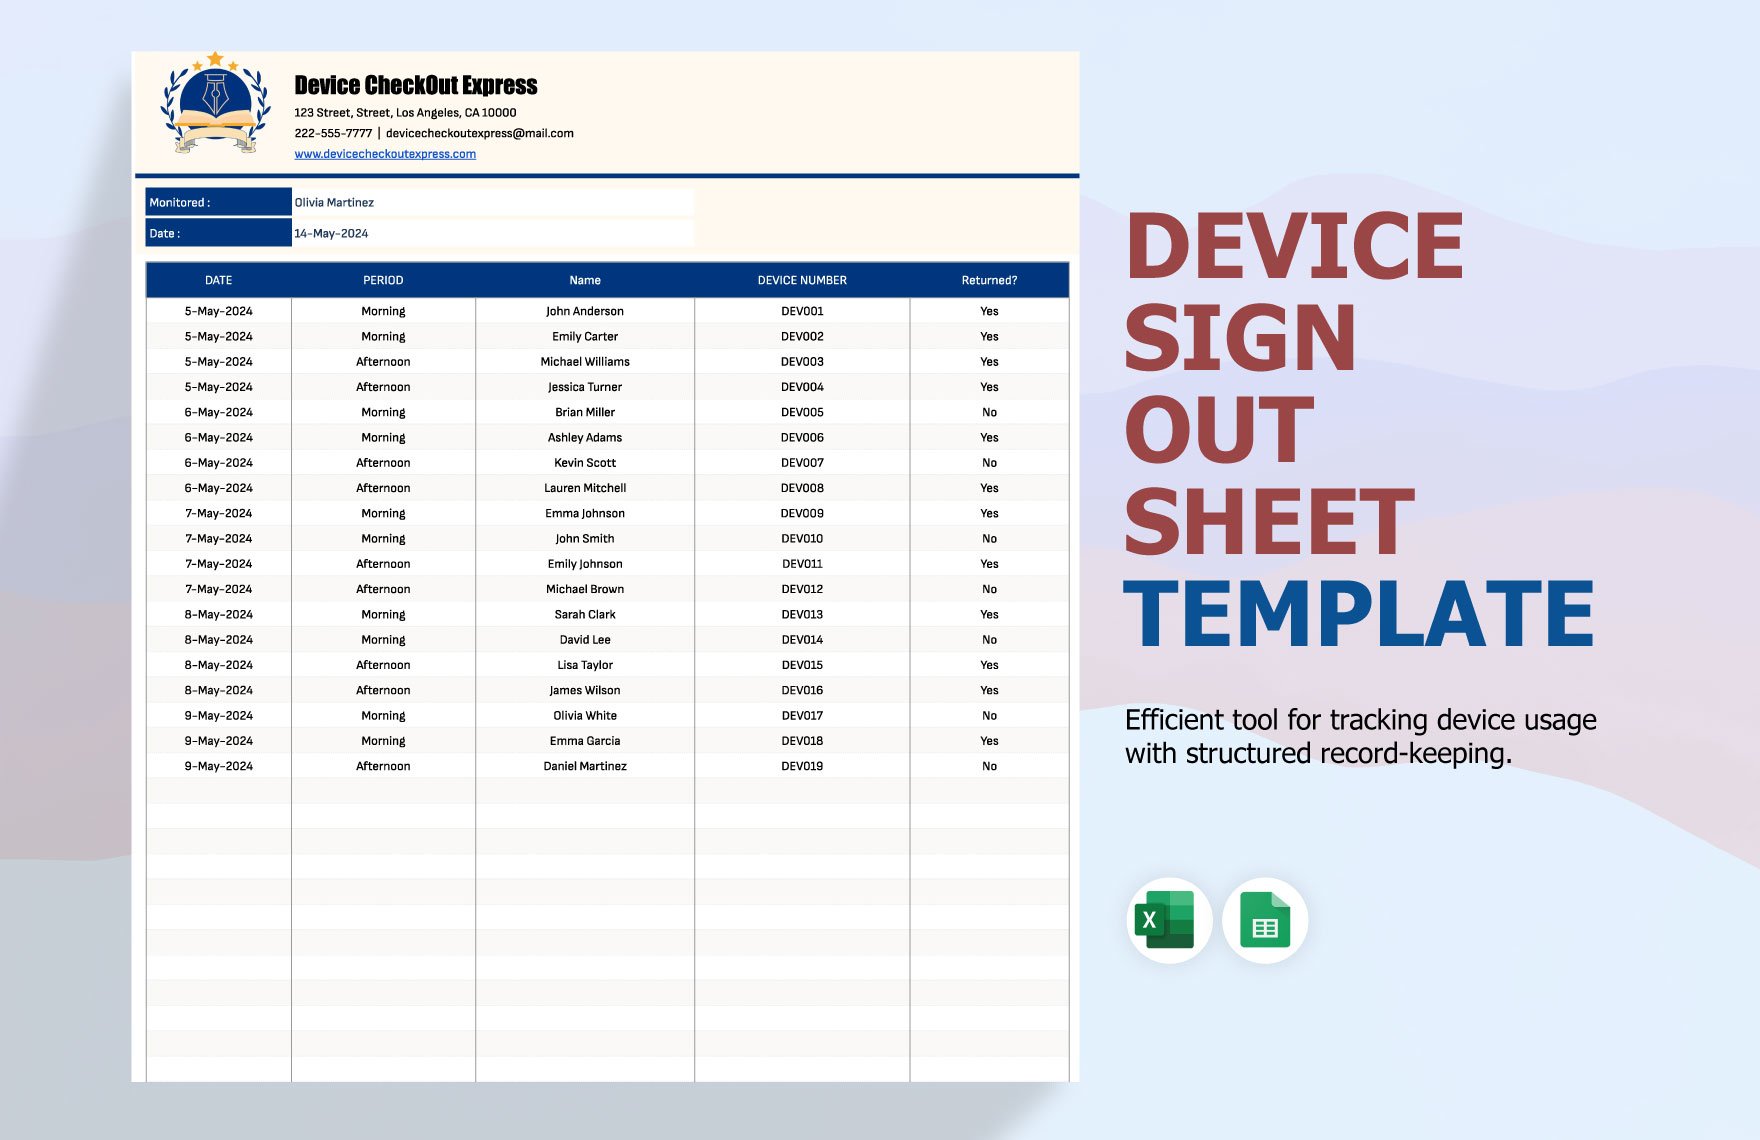 Device Sign Out Sheet Template in Excel, Google Sheets